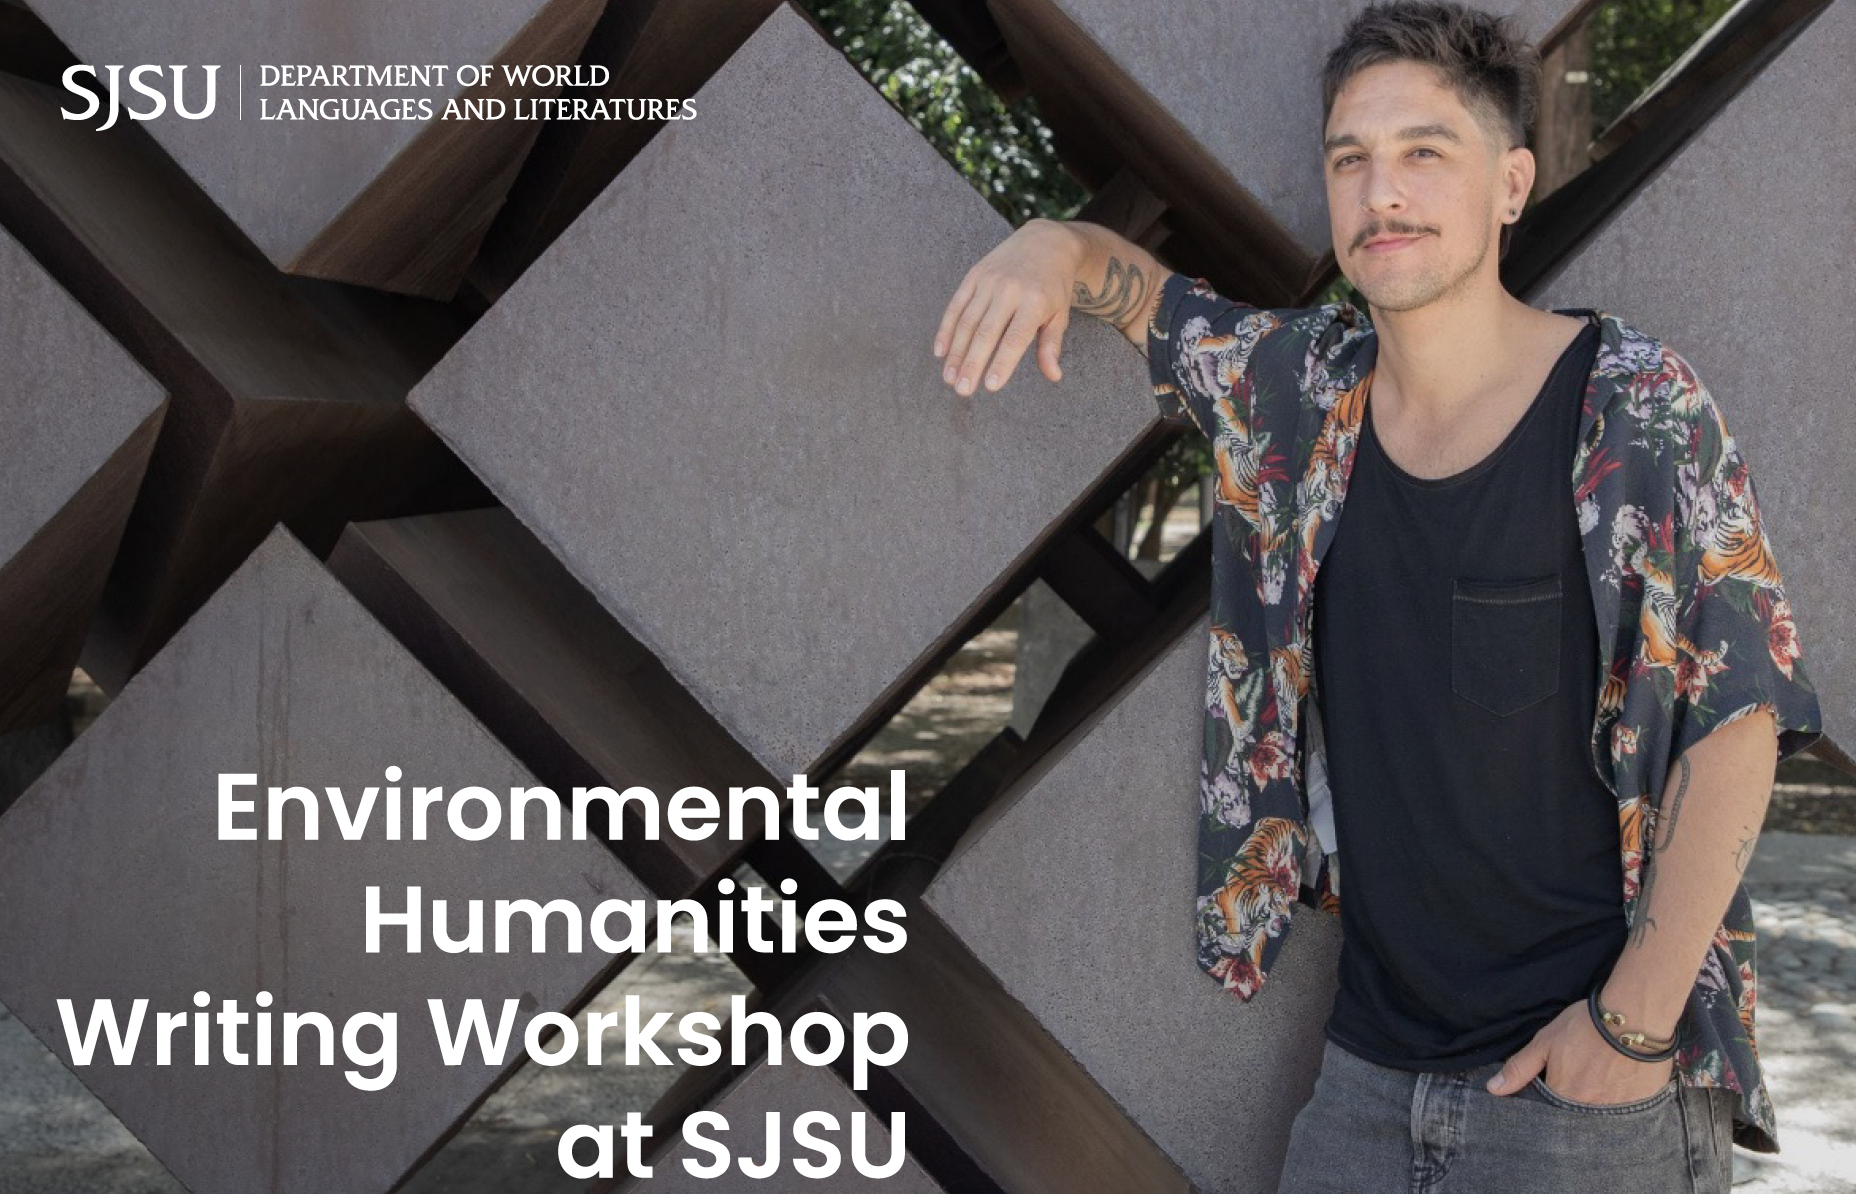 Flyer picture featuring the guest speaker, Andres Cota Hiriart, and the event title: "Environmental Humanities Writing Workshop at SJSU"